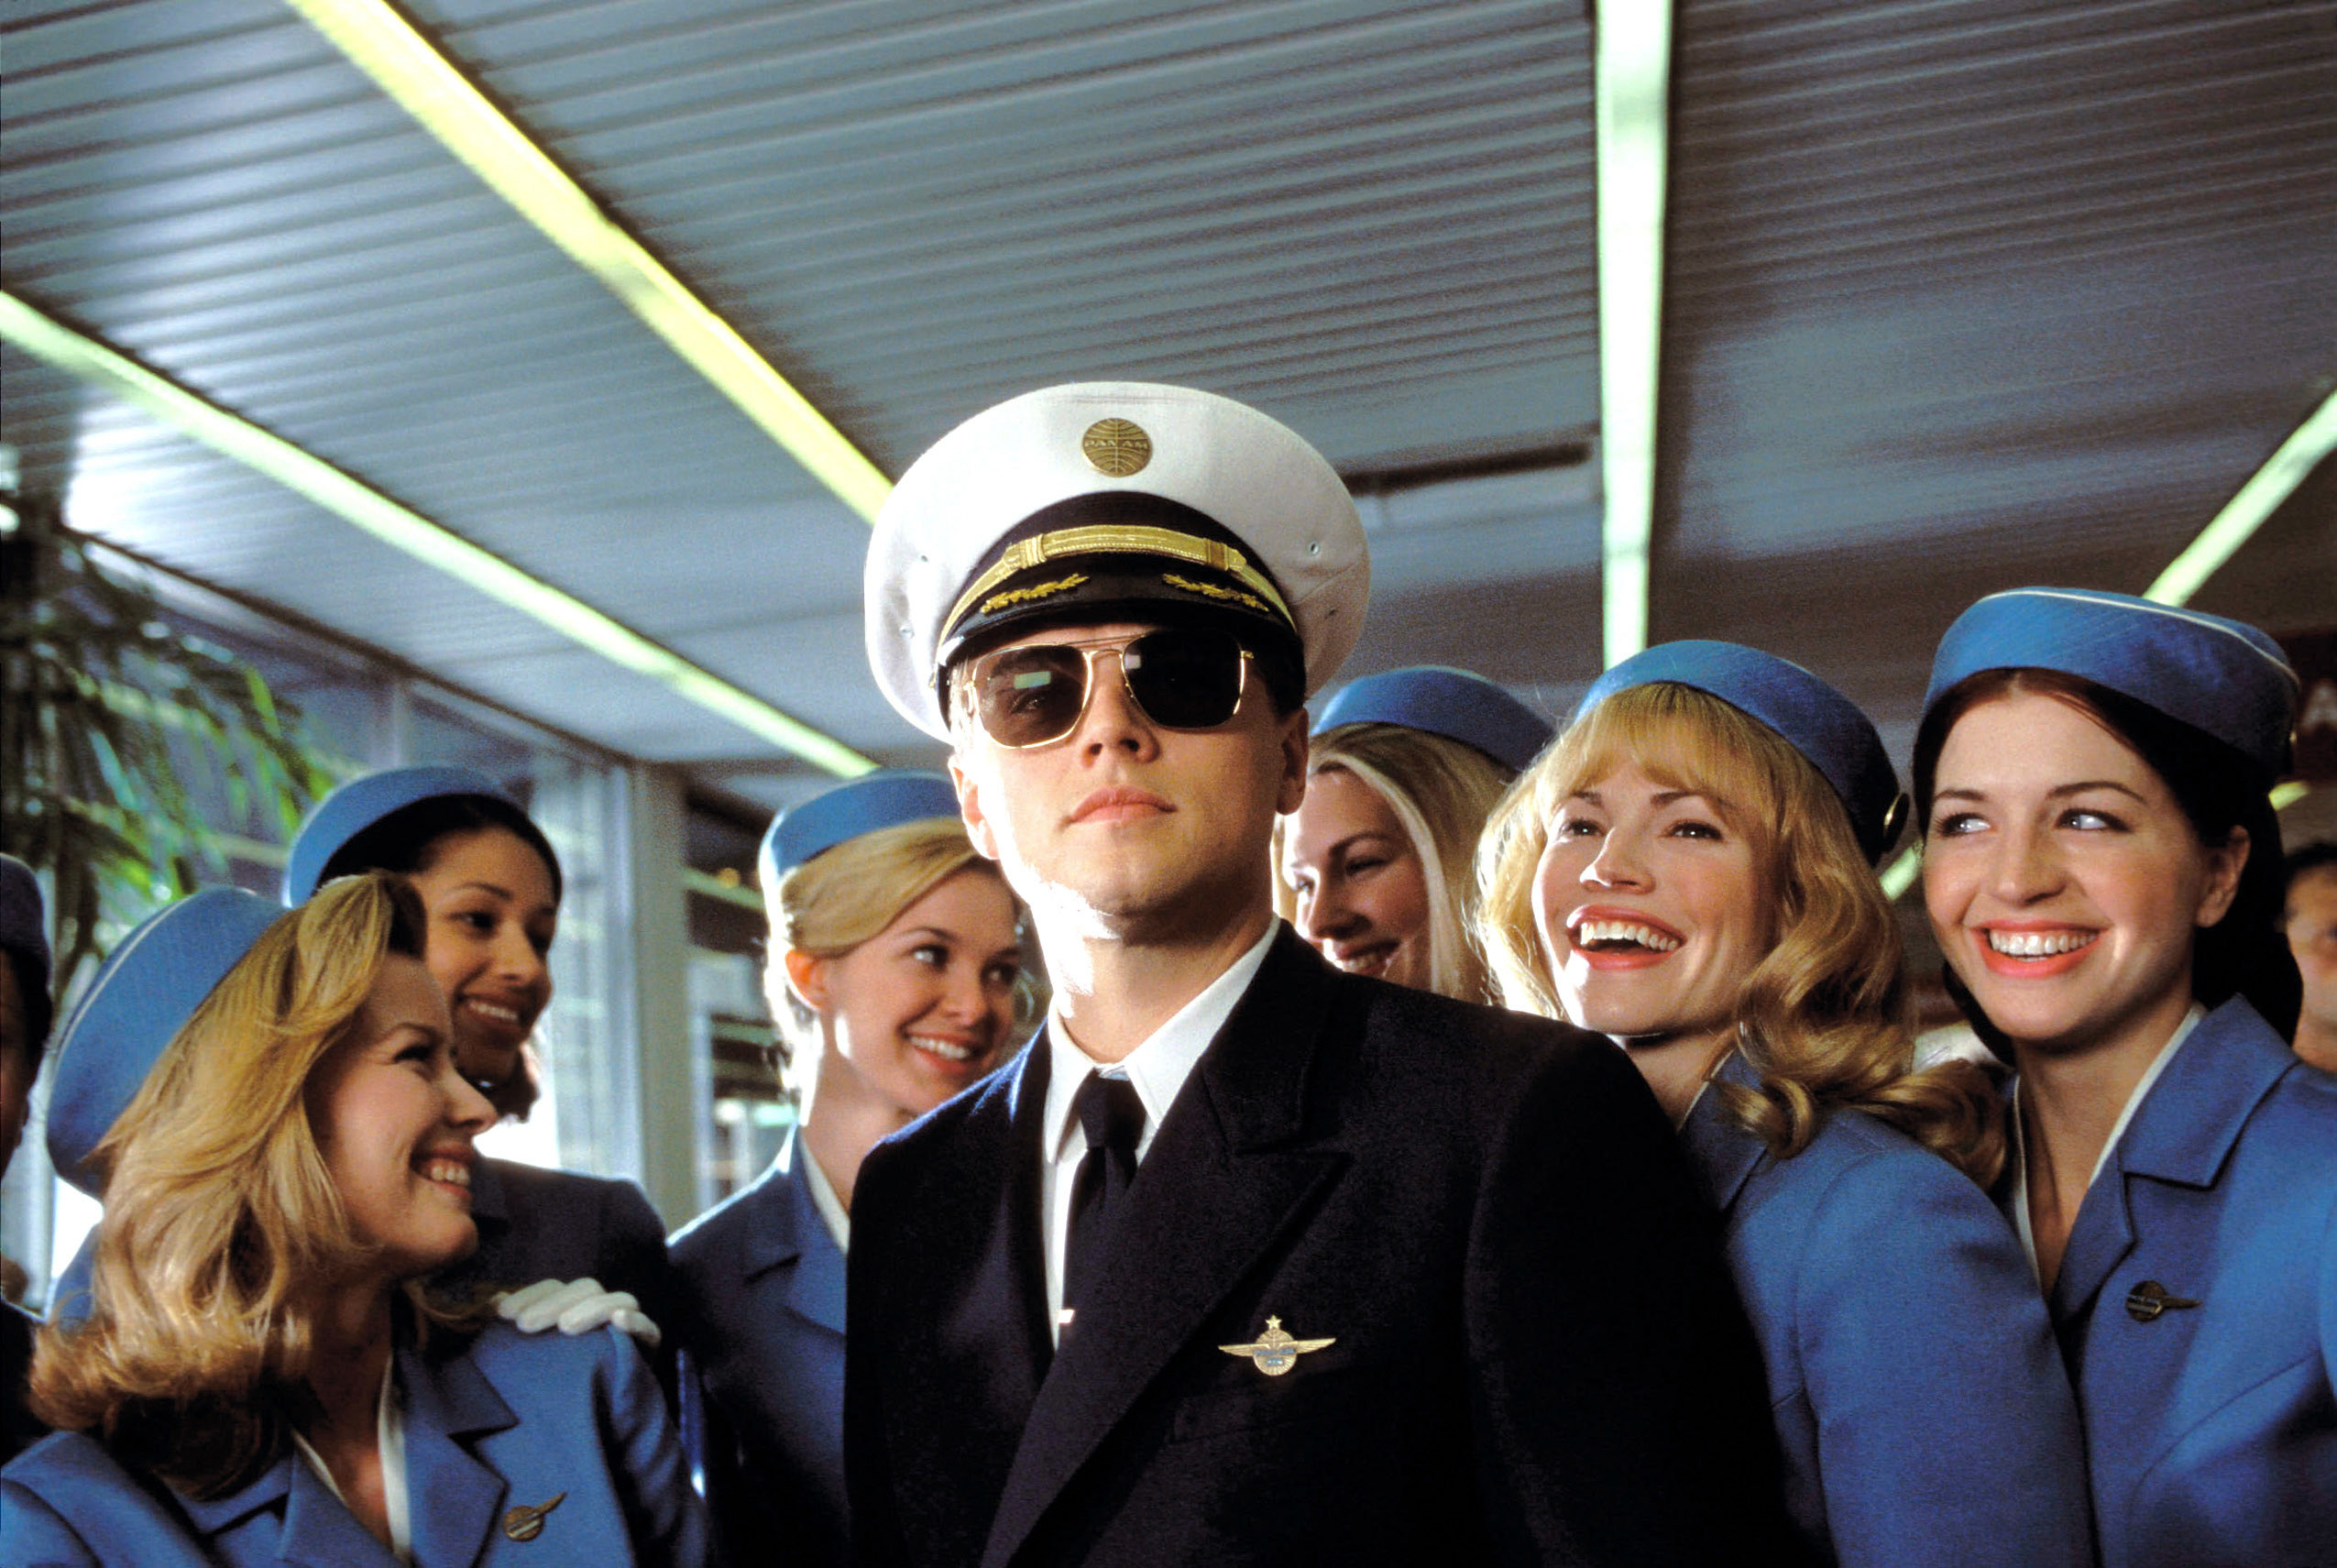 Leonardo DiCaprio dressed as a pilot surrounded by flight attendants